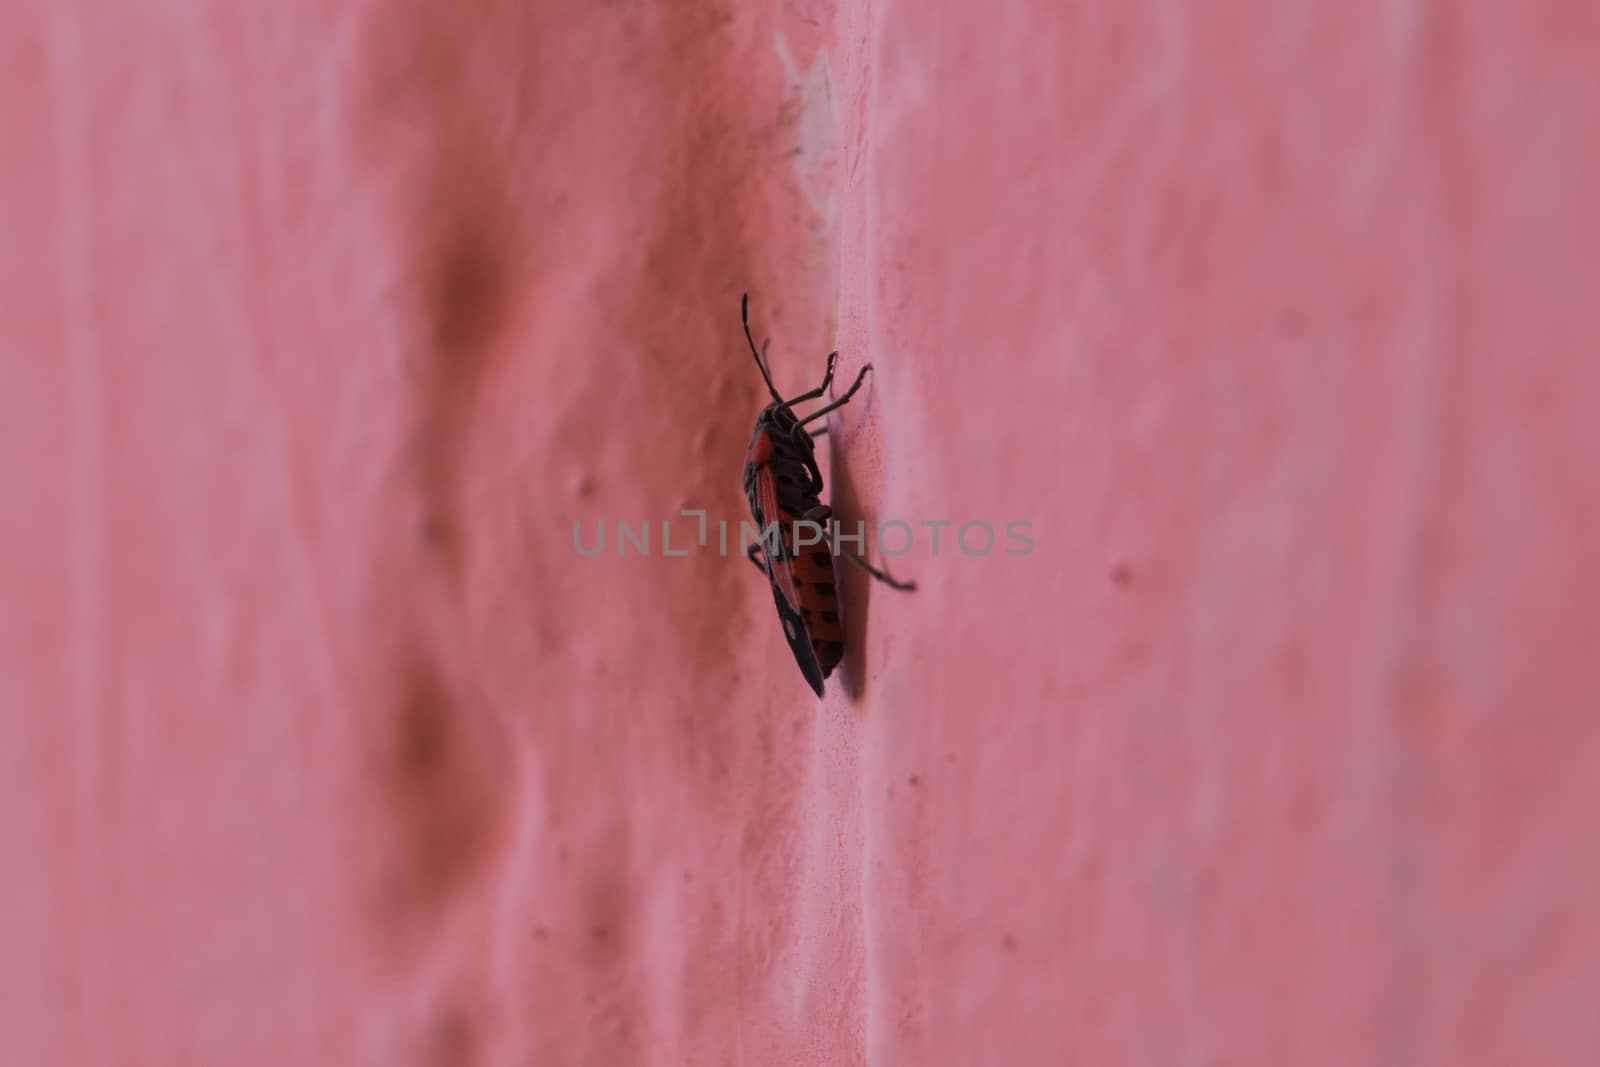 Redbug on pink wall closeup with blurred background.